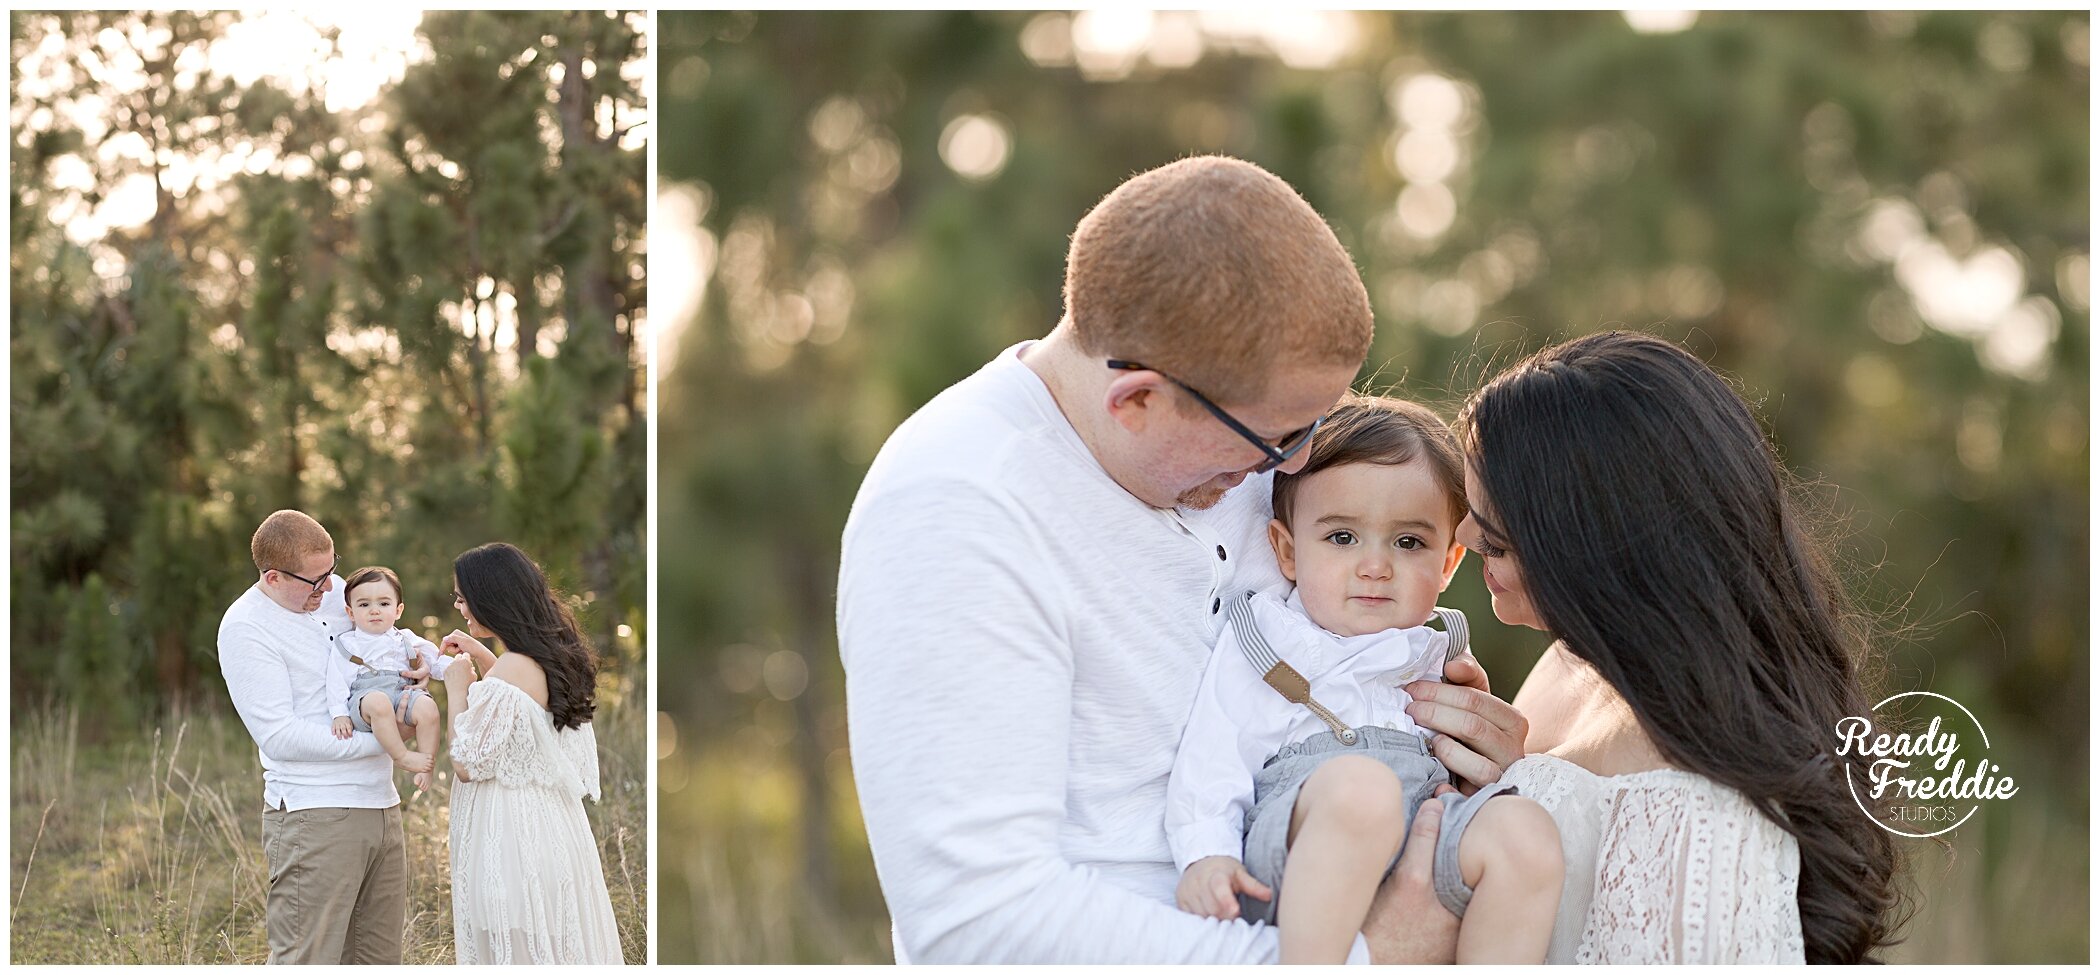 Must have photos during a family photoshoot session with Ready Freddie Studios in Miami, FL